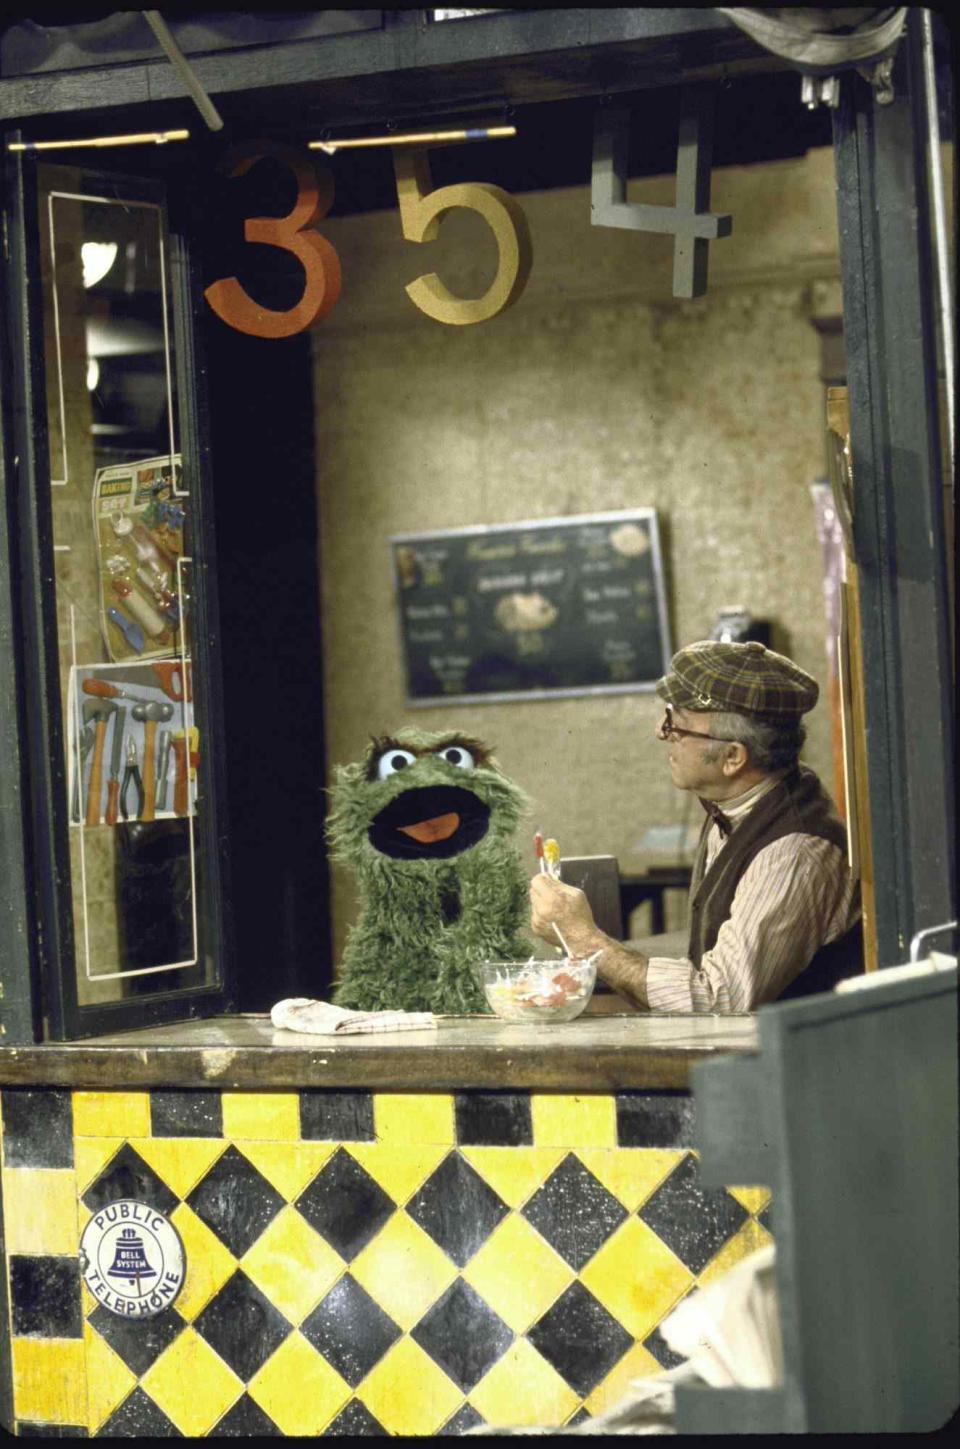 13 Rare Sesame Street Photos from the Show's First Year on Television